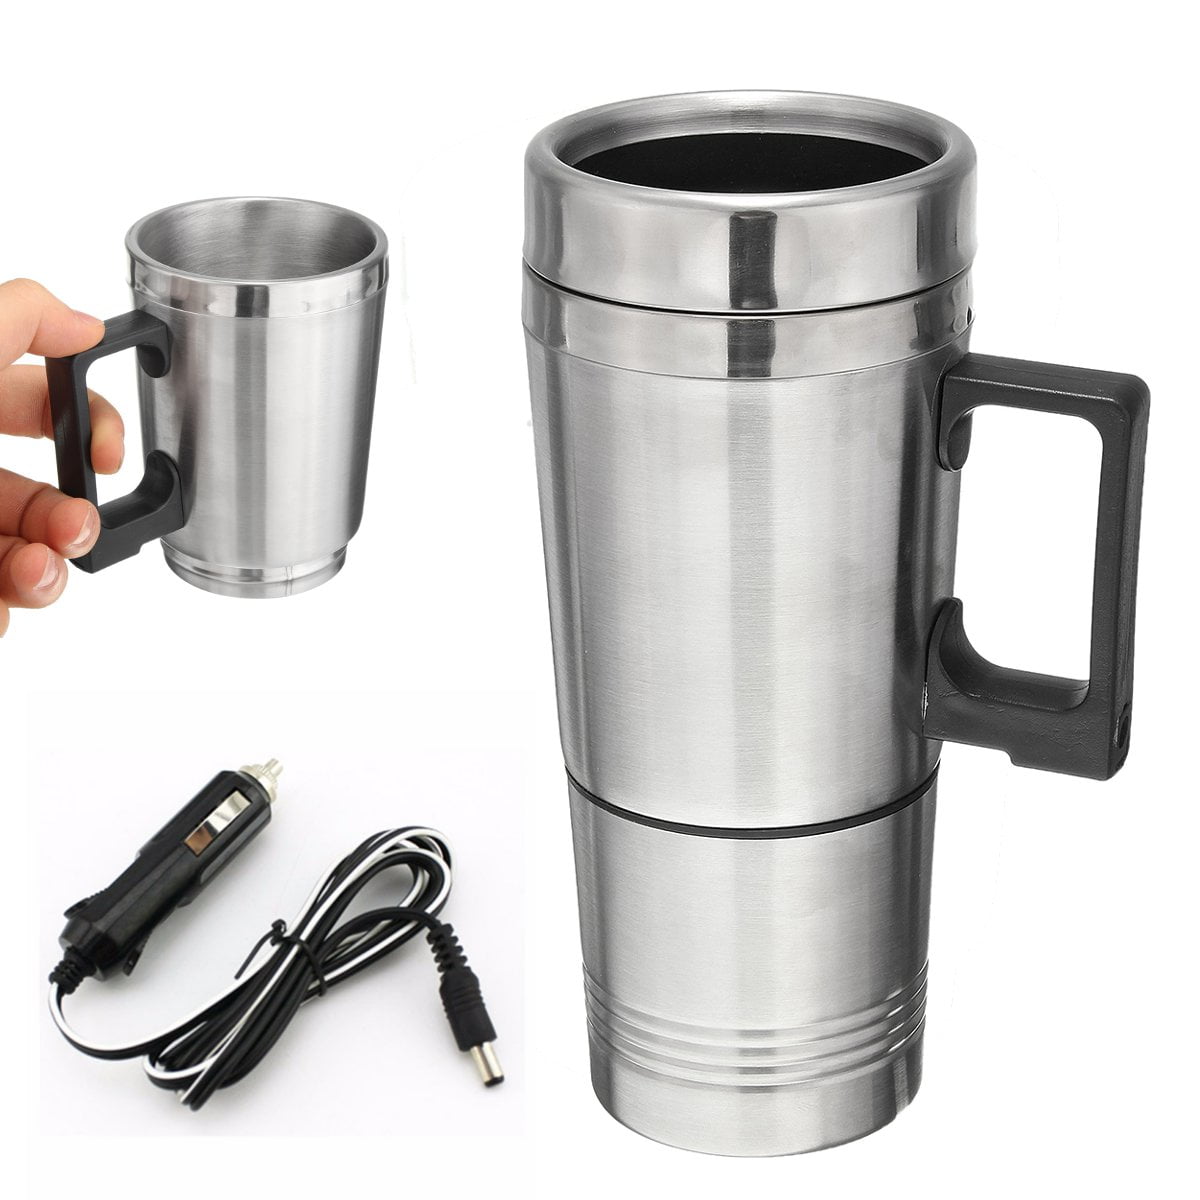 Vehicle Heater Boiling Water Heater Water Heat Cup Boiling Water 12 V Fish Clip 